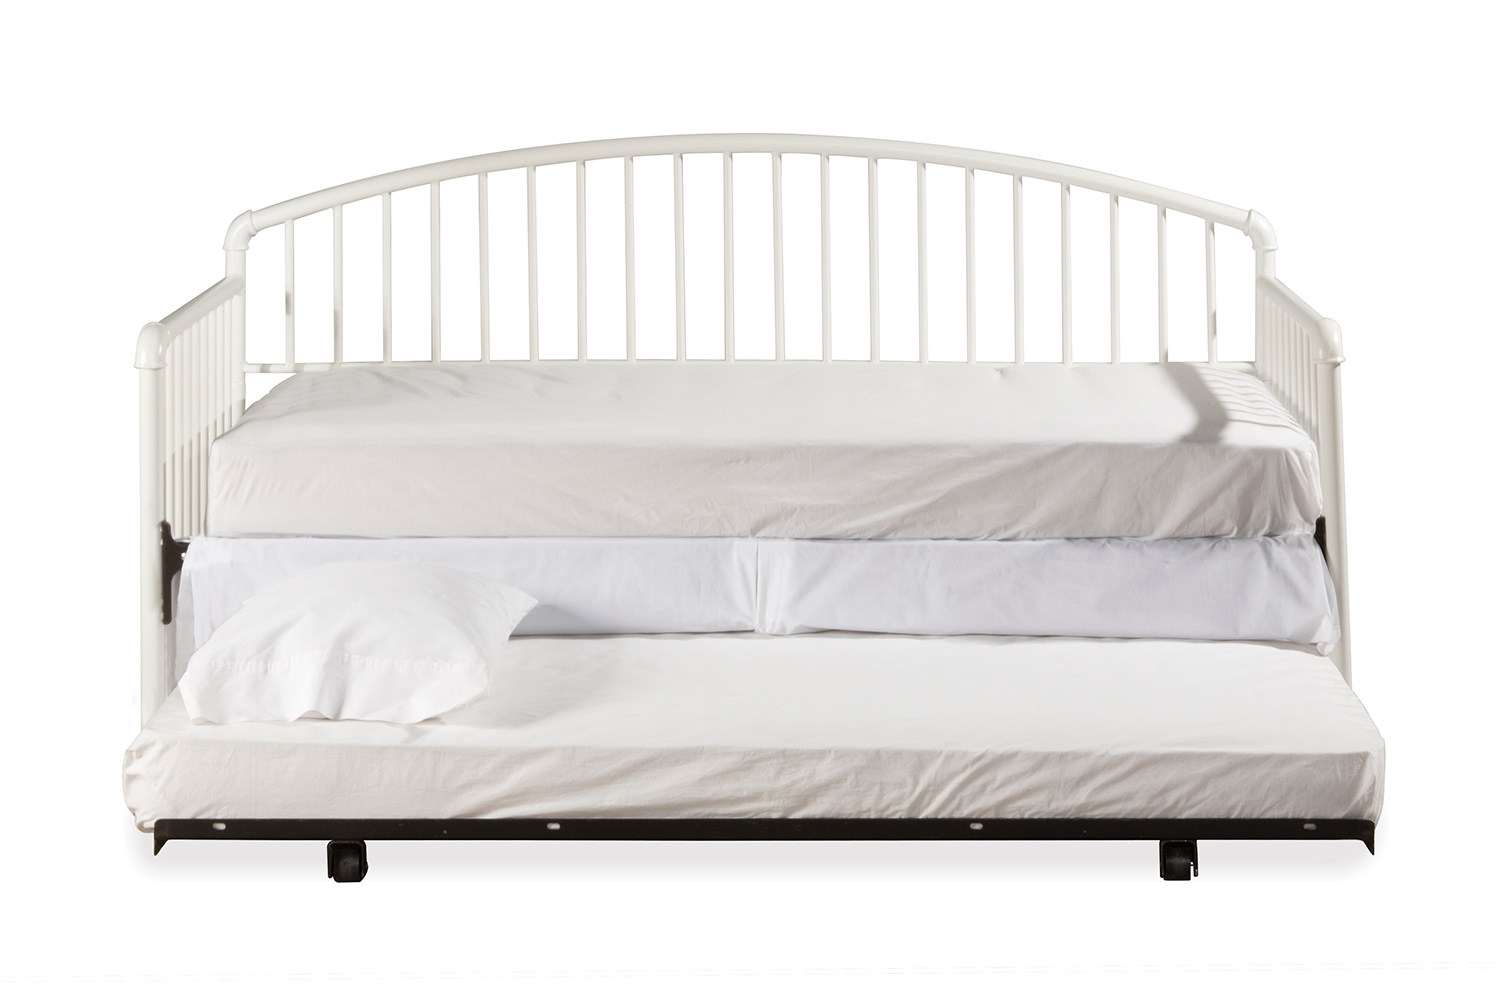 Hillsdale Brandi Daybed with Trundle - White